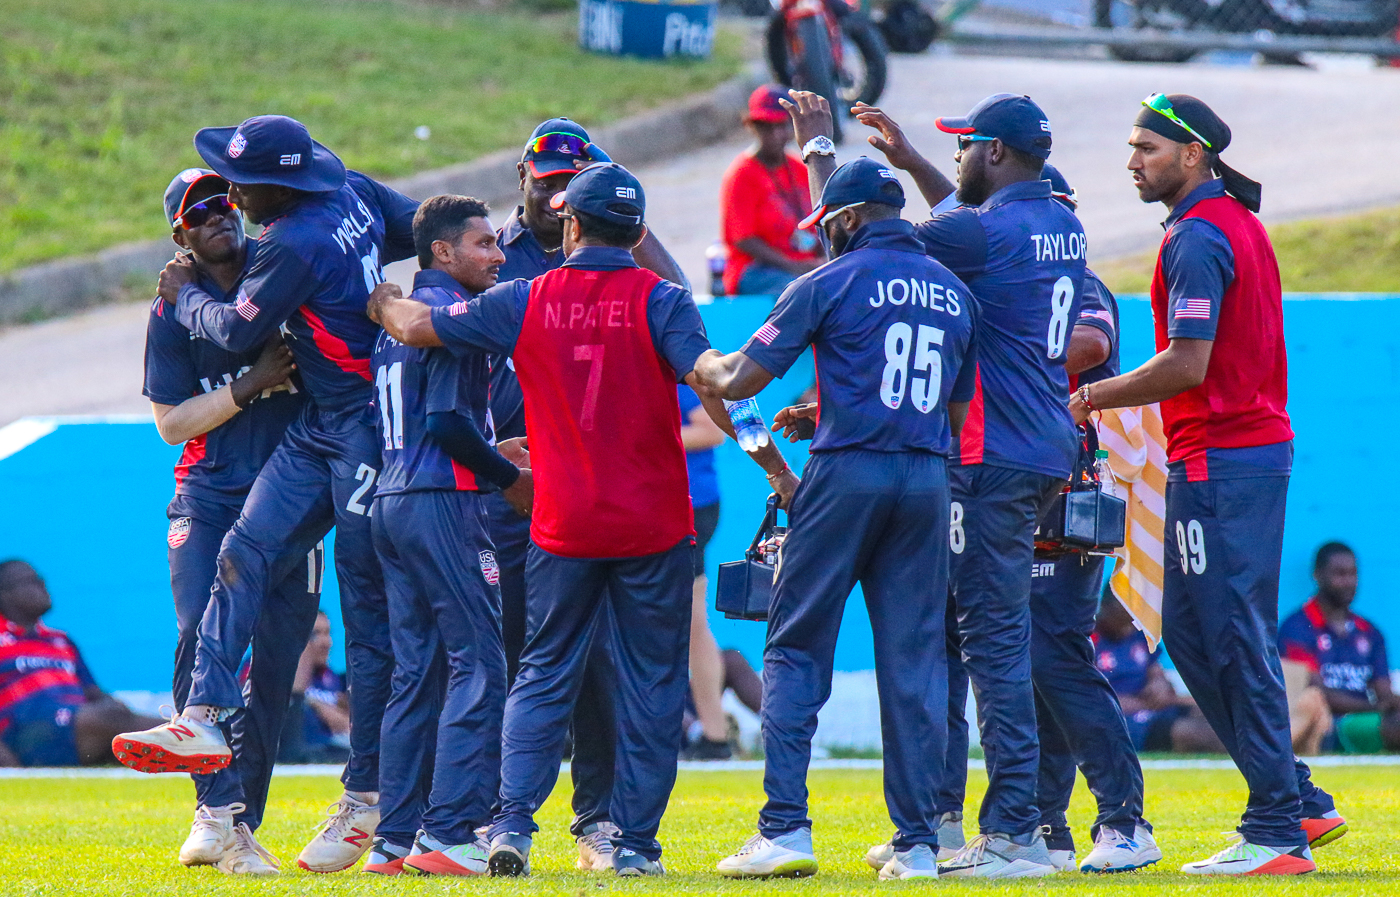 Team USA Squad Announced for first ODI Series